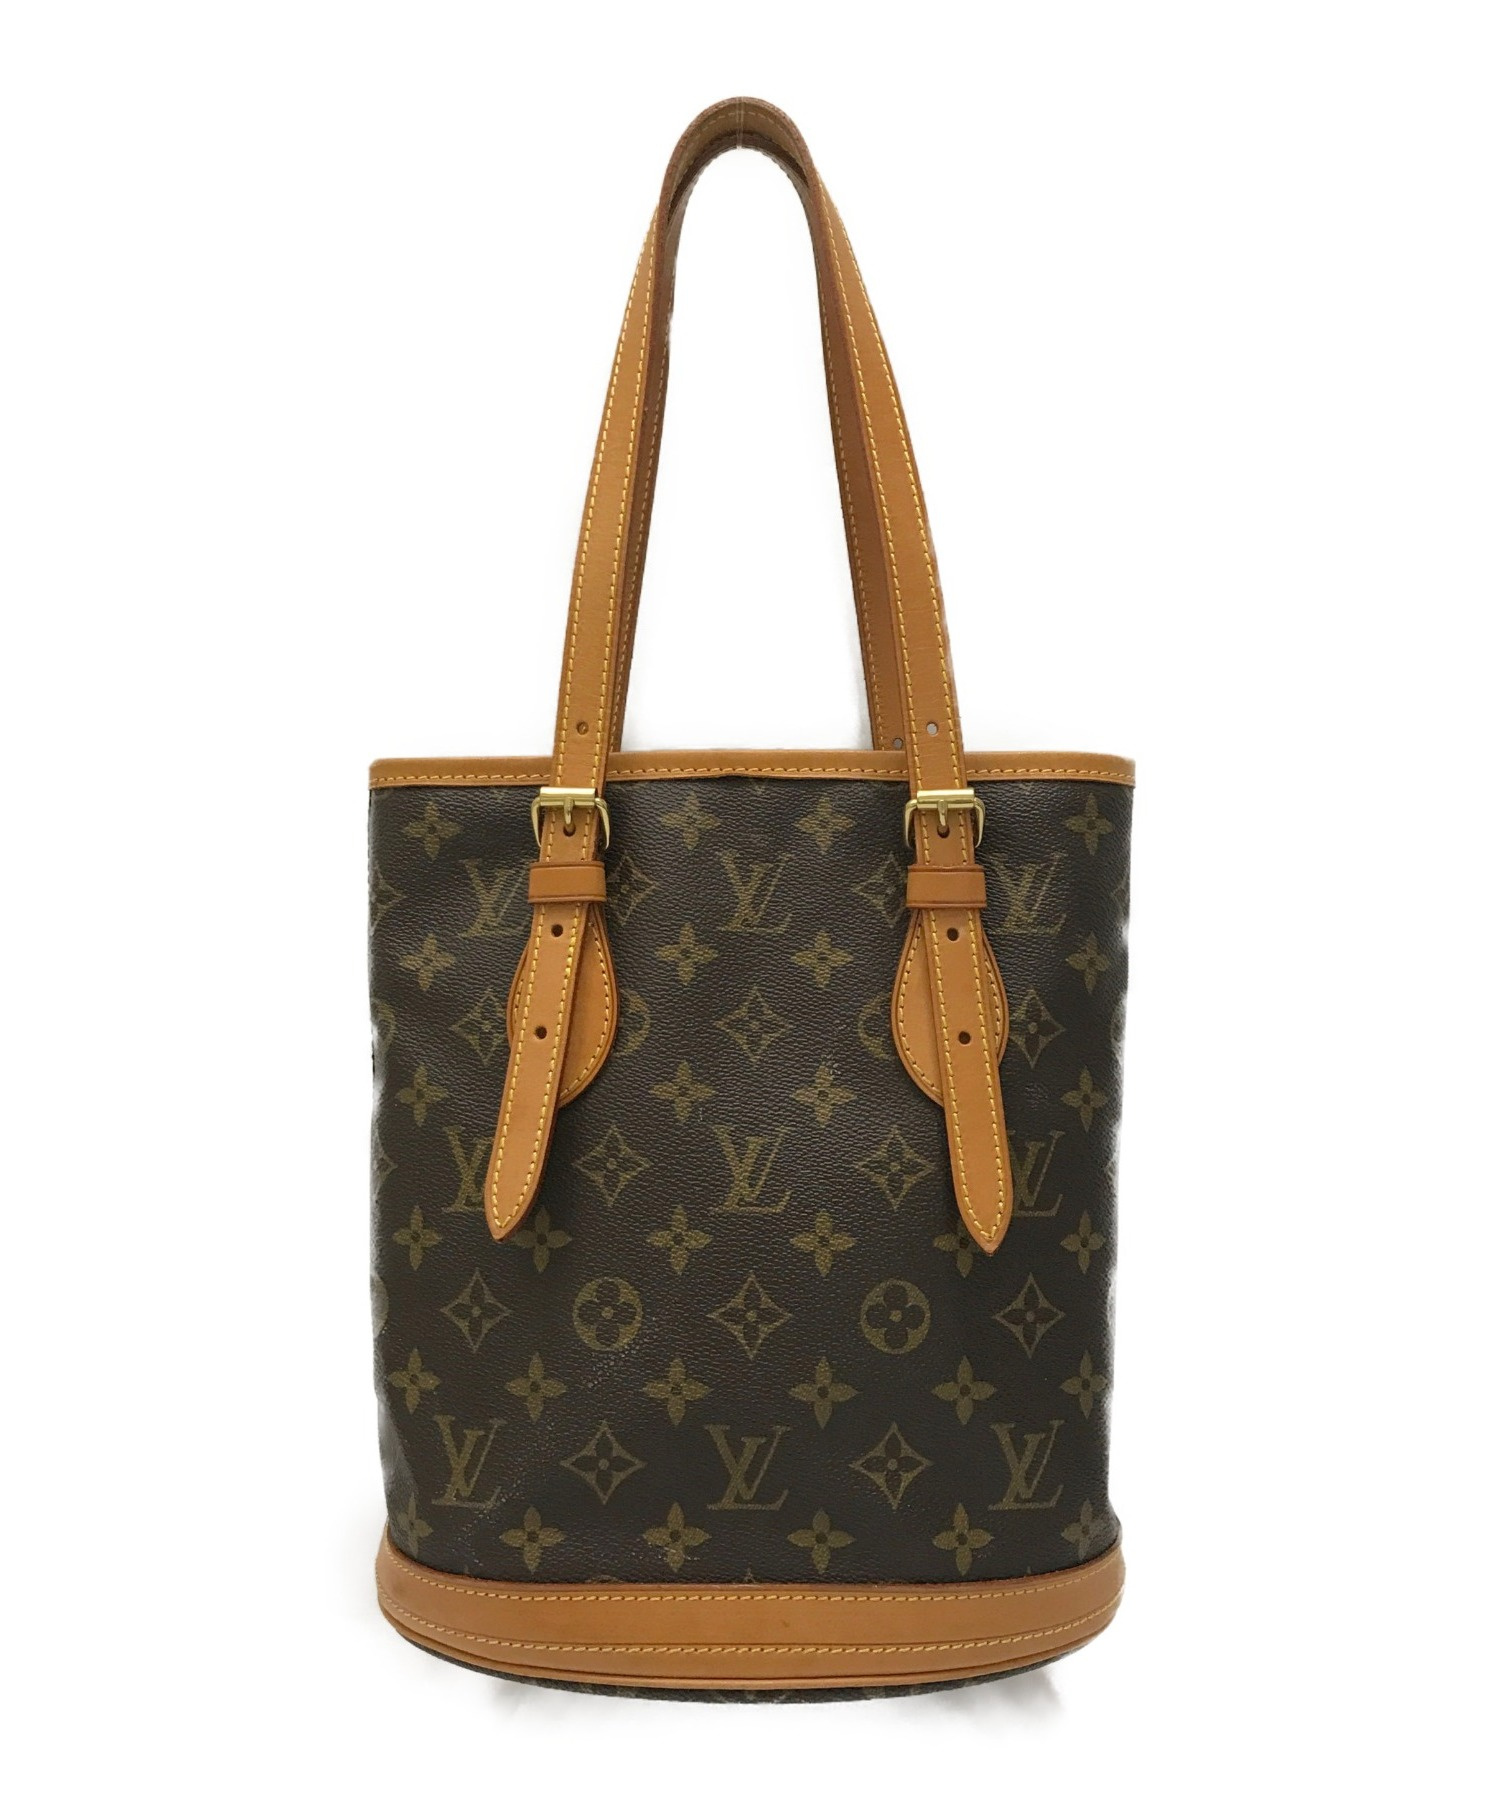 LOUIS VUITTON ルイヴィトン モノグラム バケットPM トートバッグ-